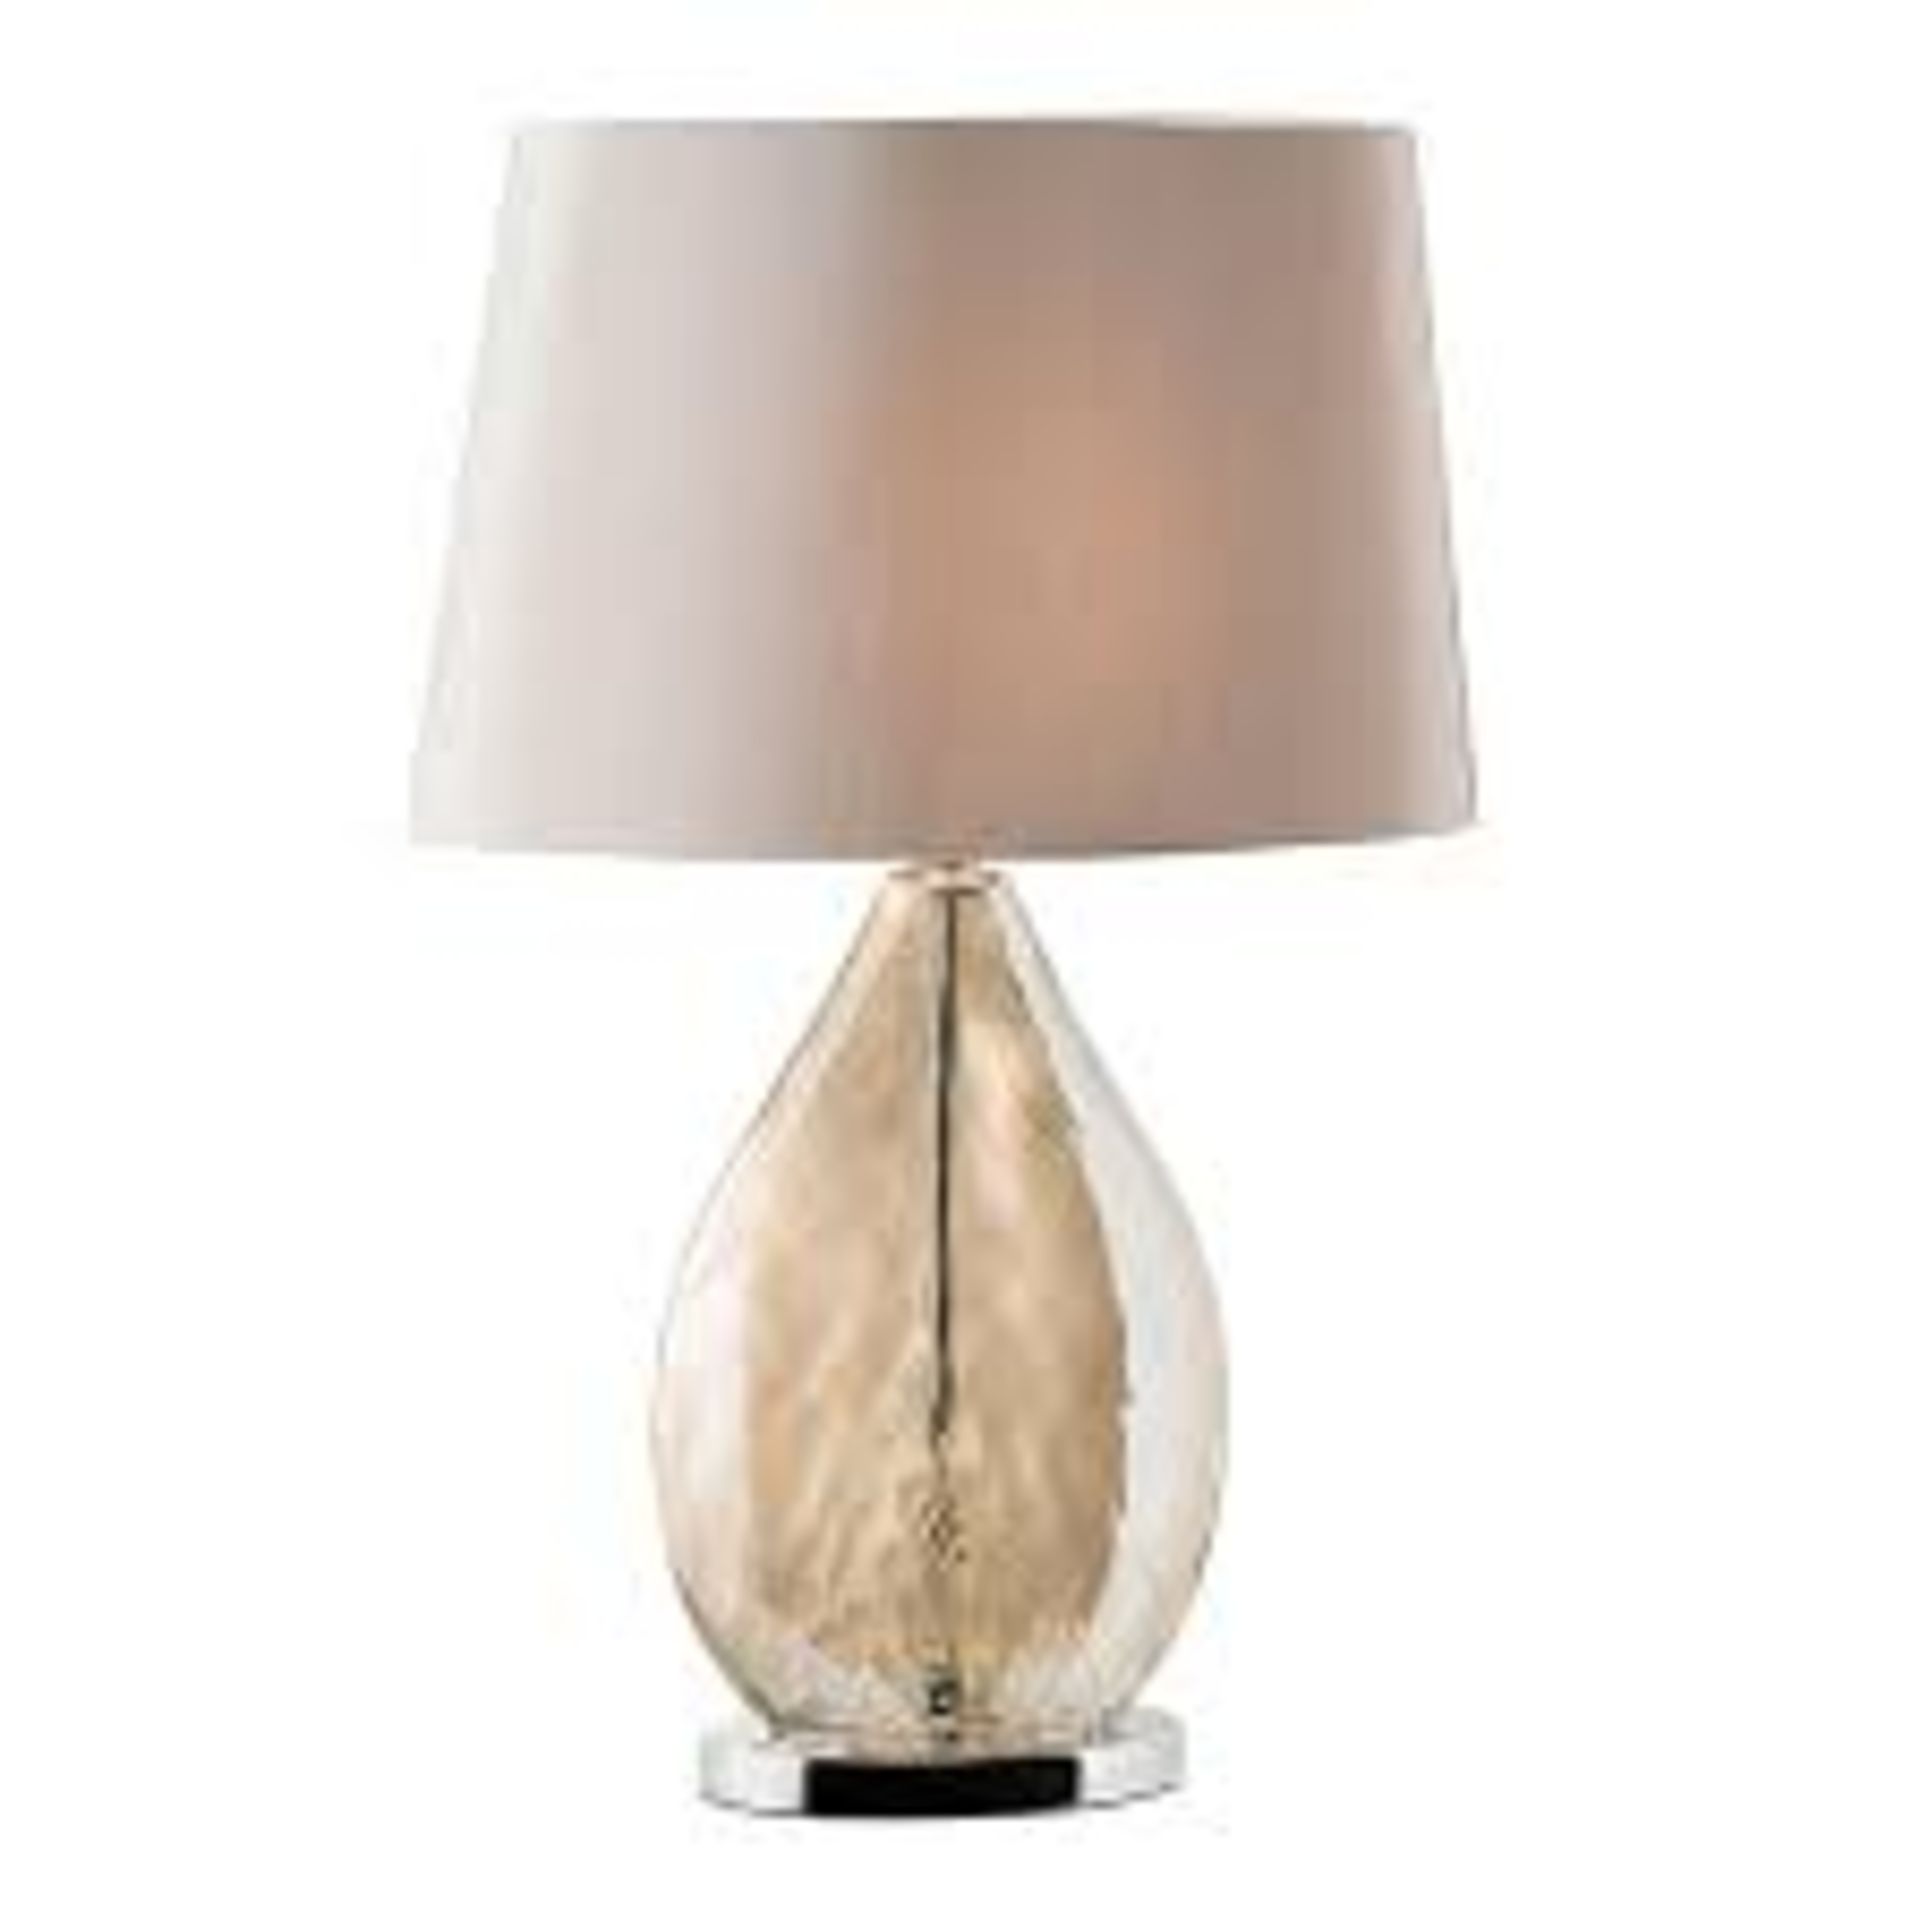 Boxed Enden Lighting Messena Table Lamp RRP £95 (18066) (Appraisals Available Upon Request) (